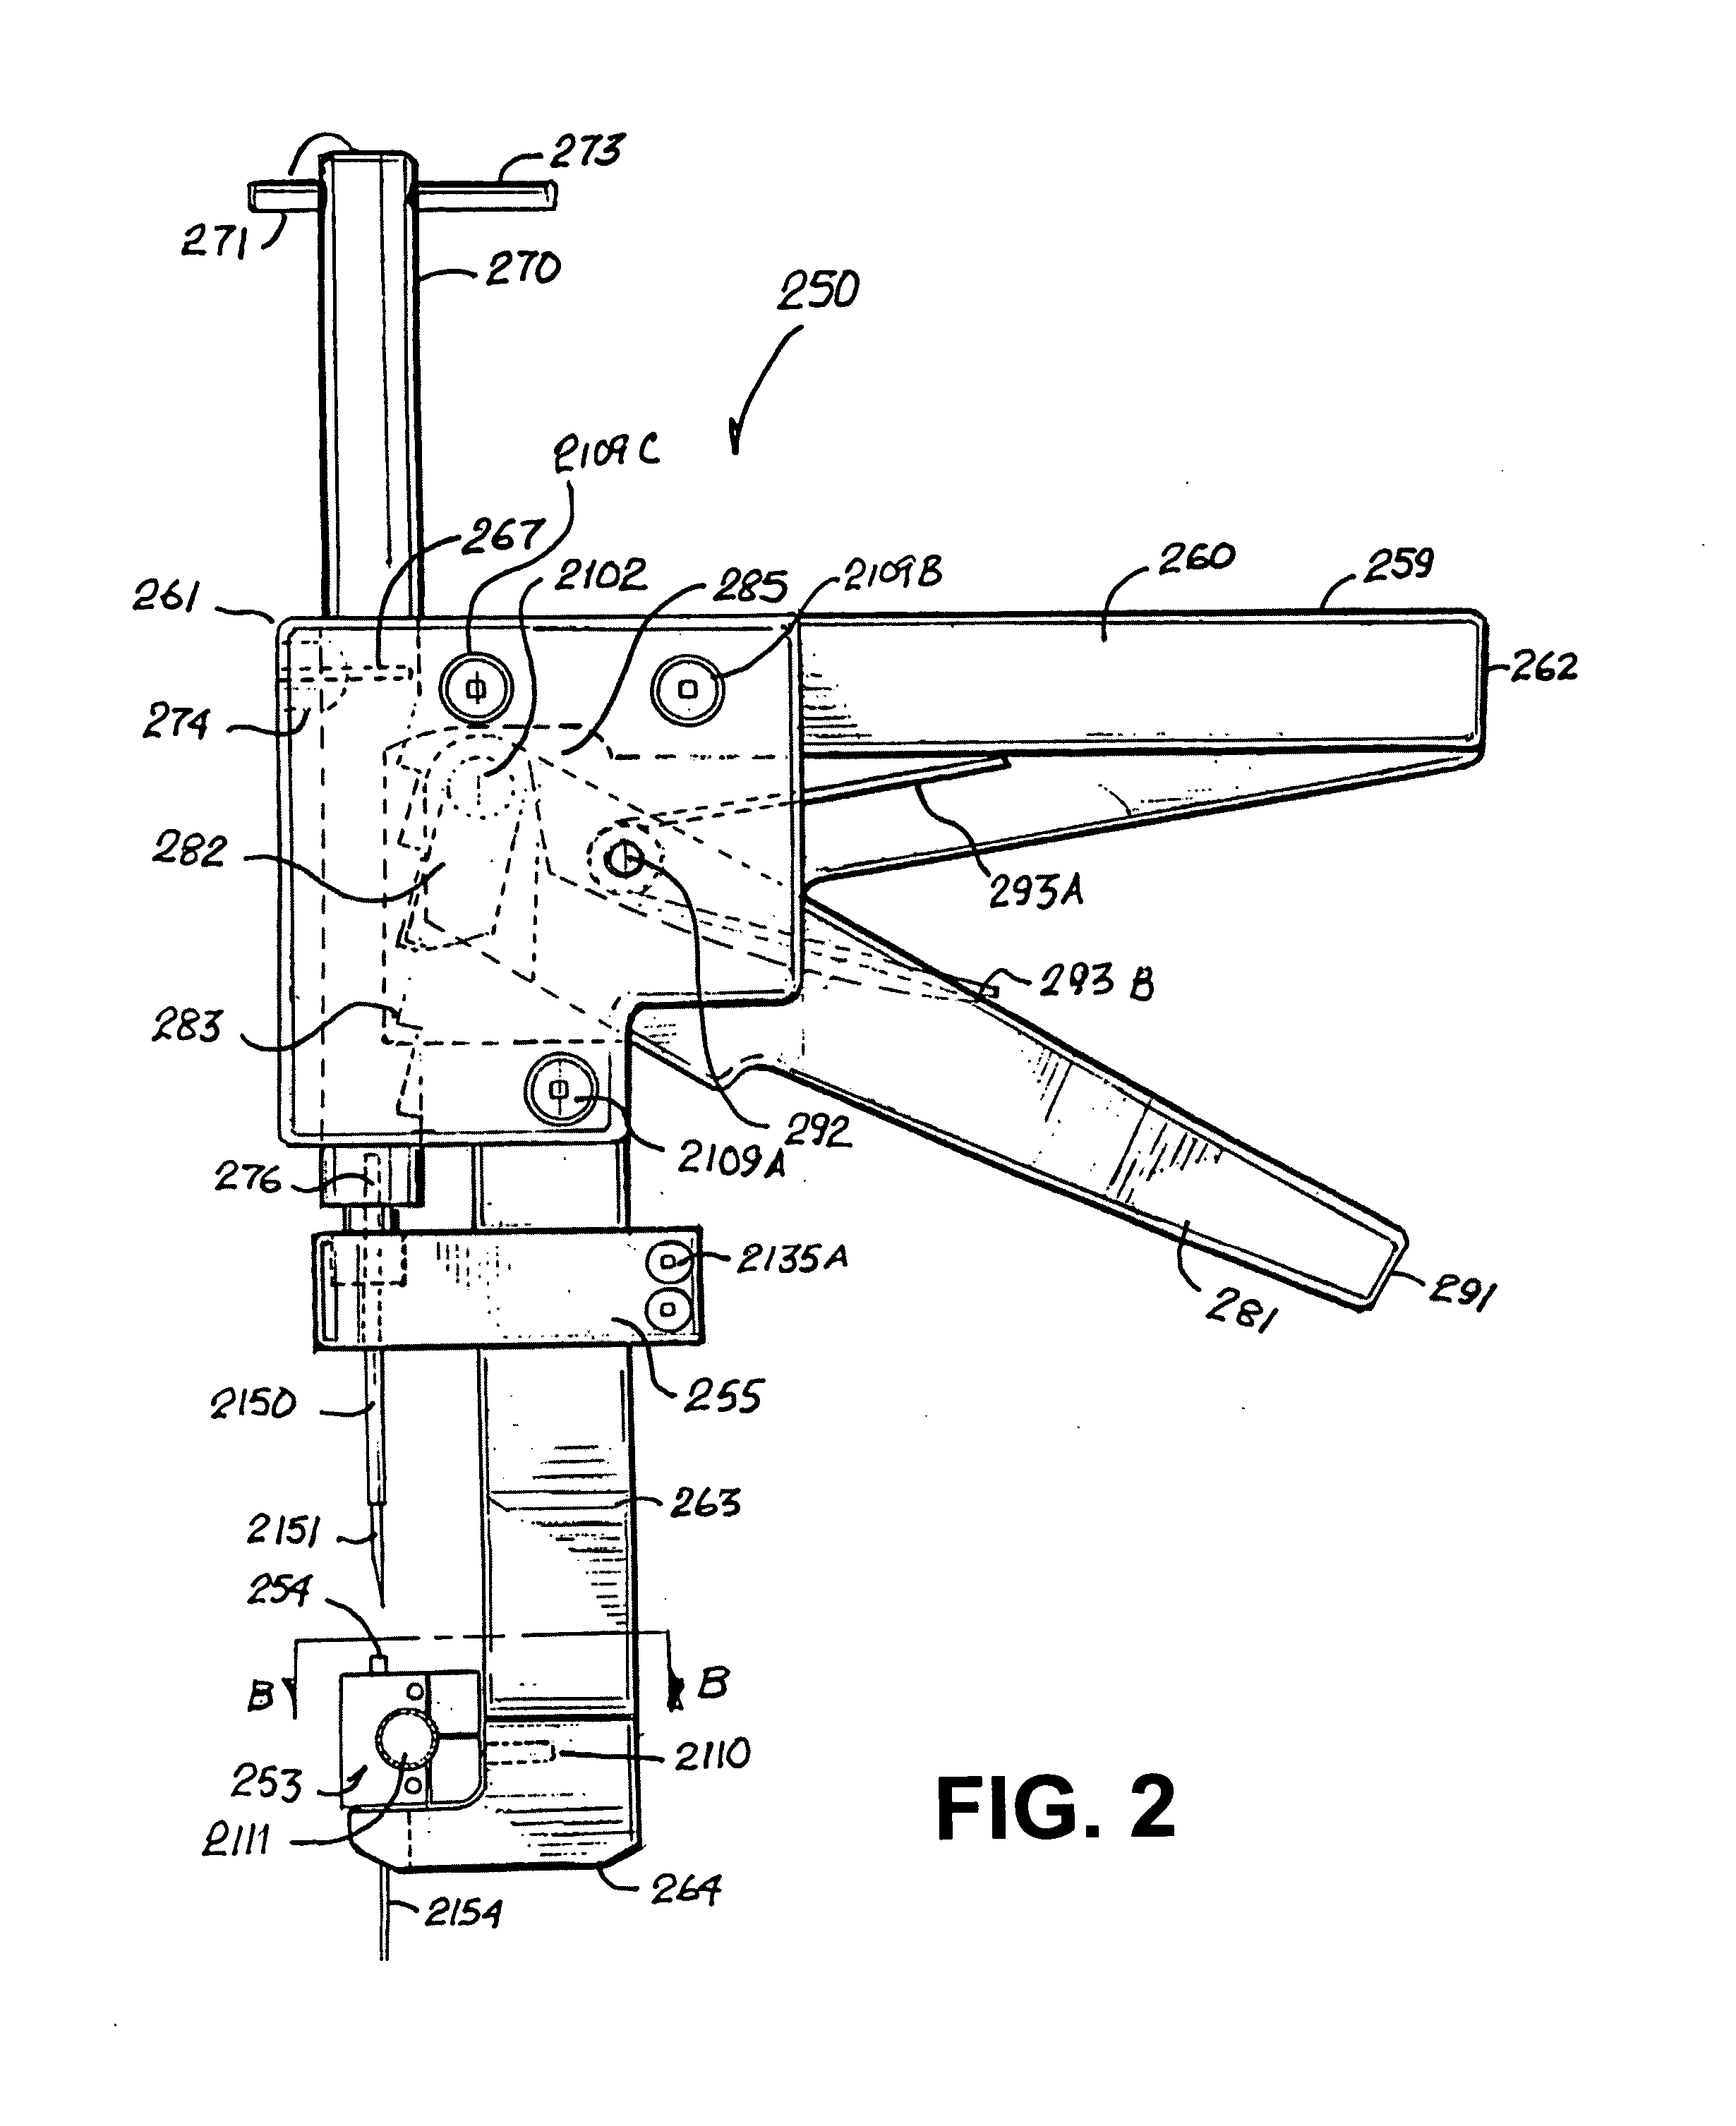 Suture apparatus and method for sternal closure